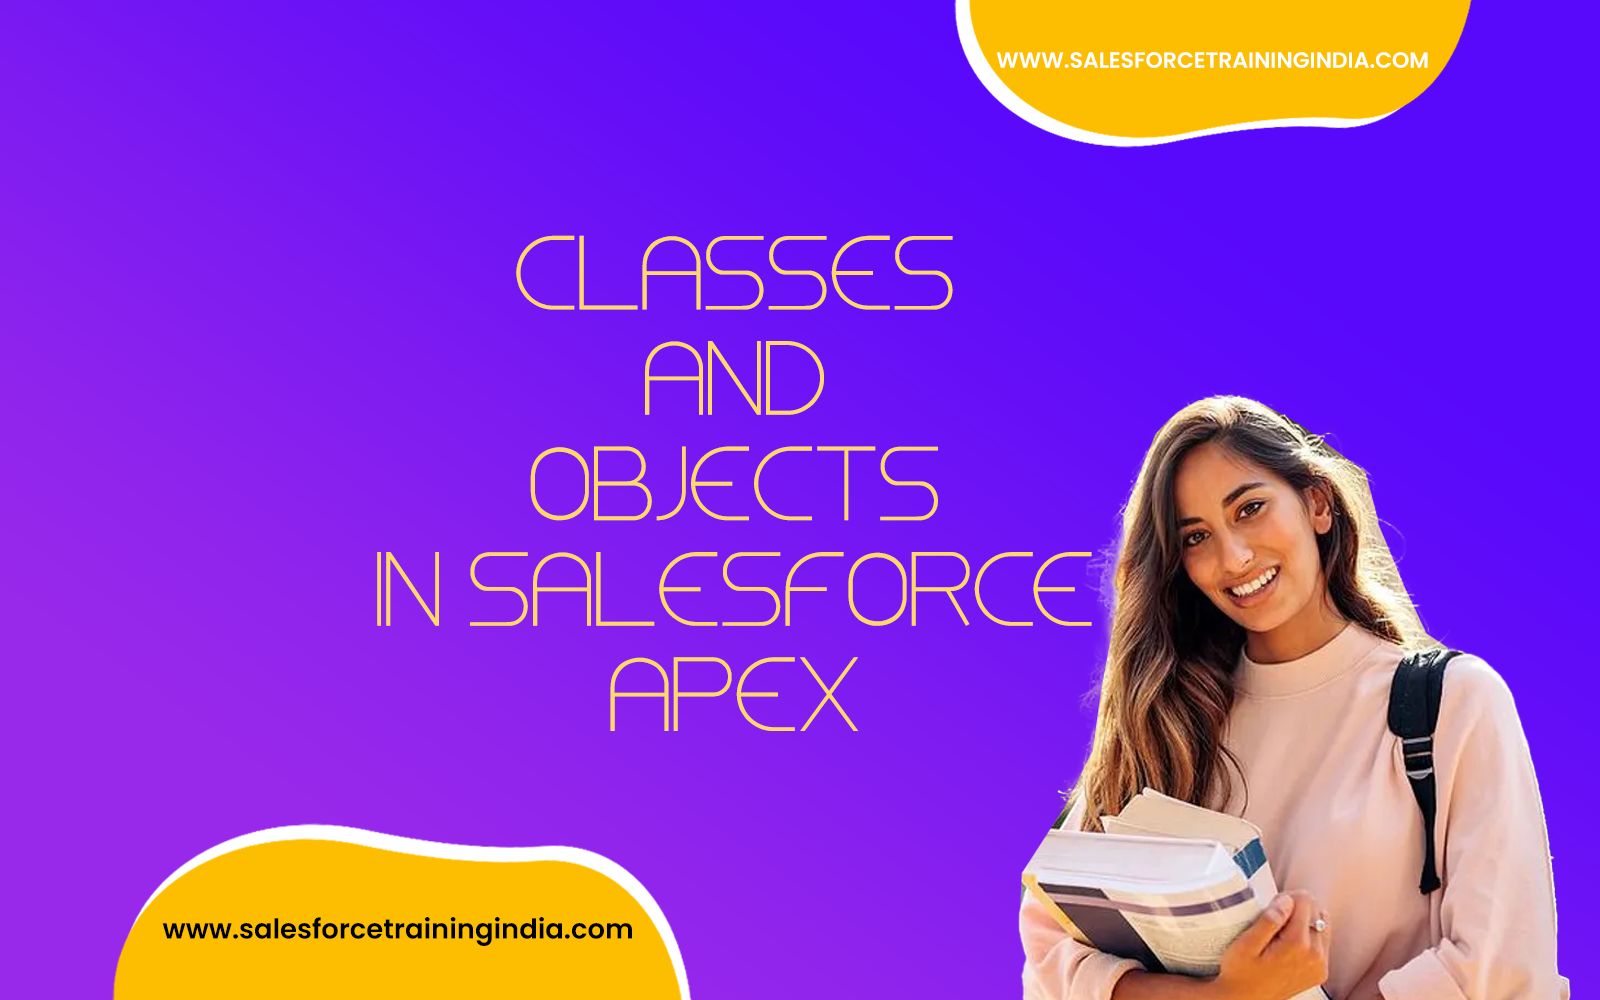 Classes and objects in salesforce apex